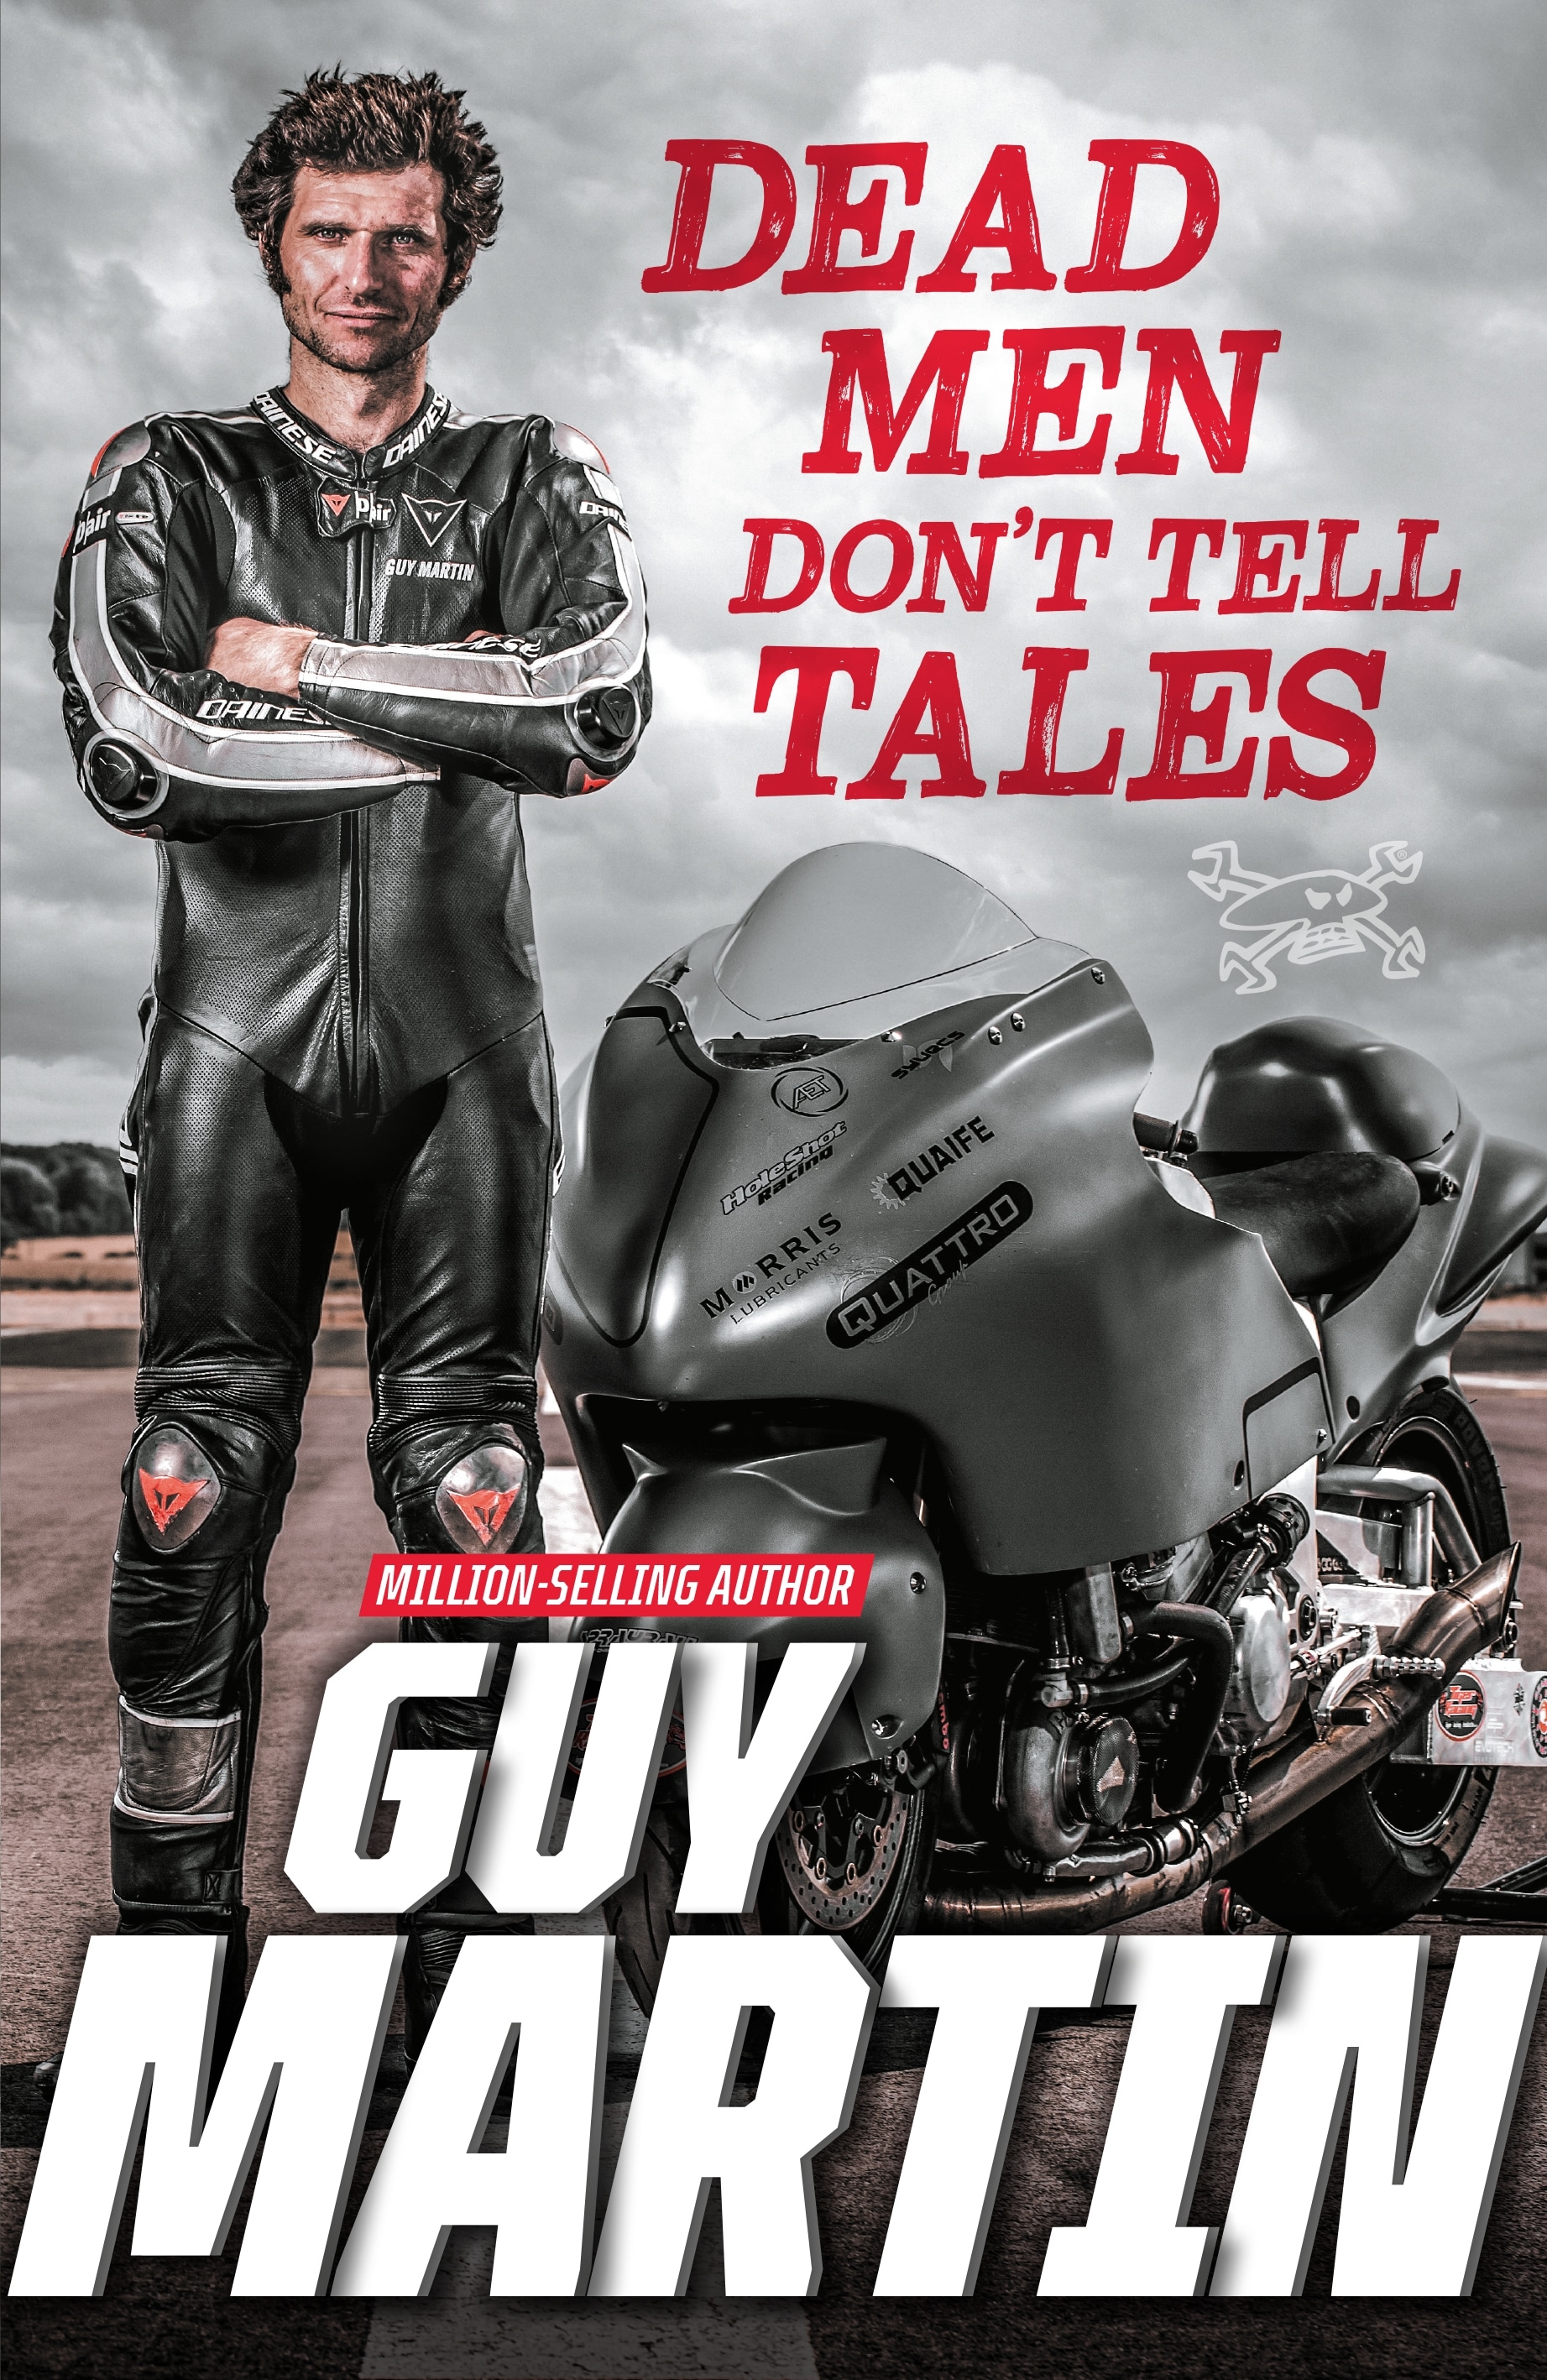 Book “Dead Men Don't Tell Tales” by Guy Martin — October 28, 2021